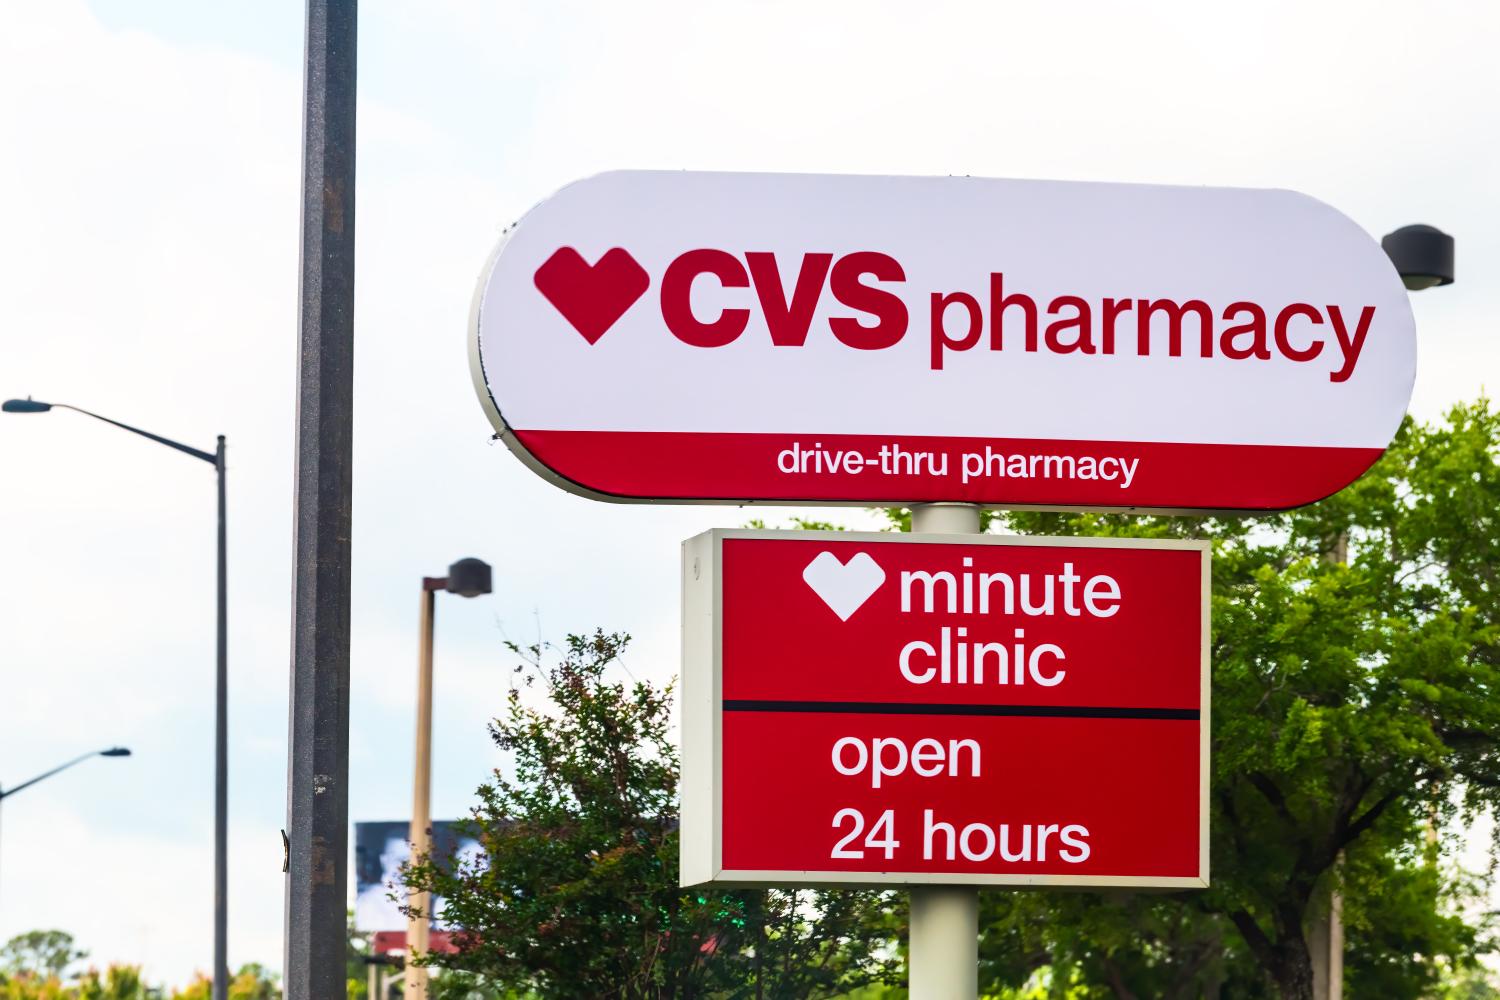 Sign for CVS Minute Clinic